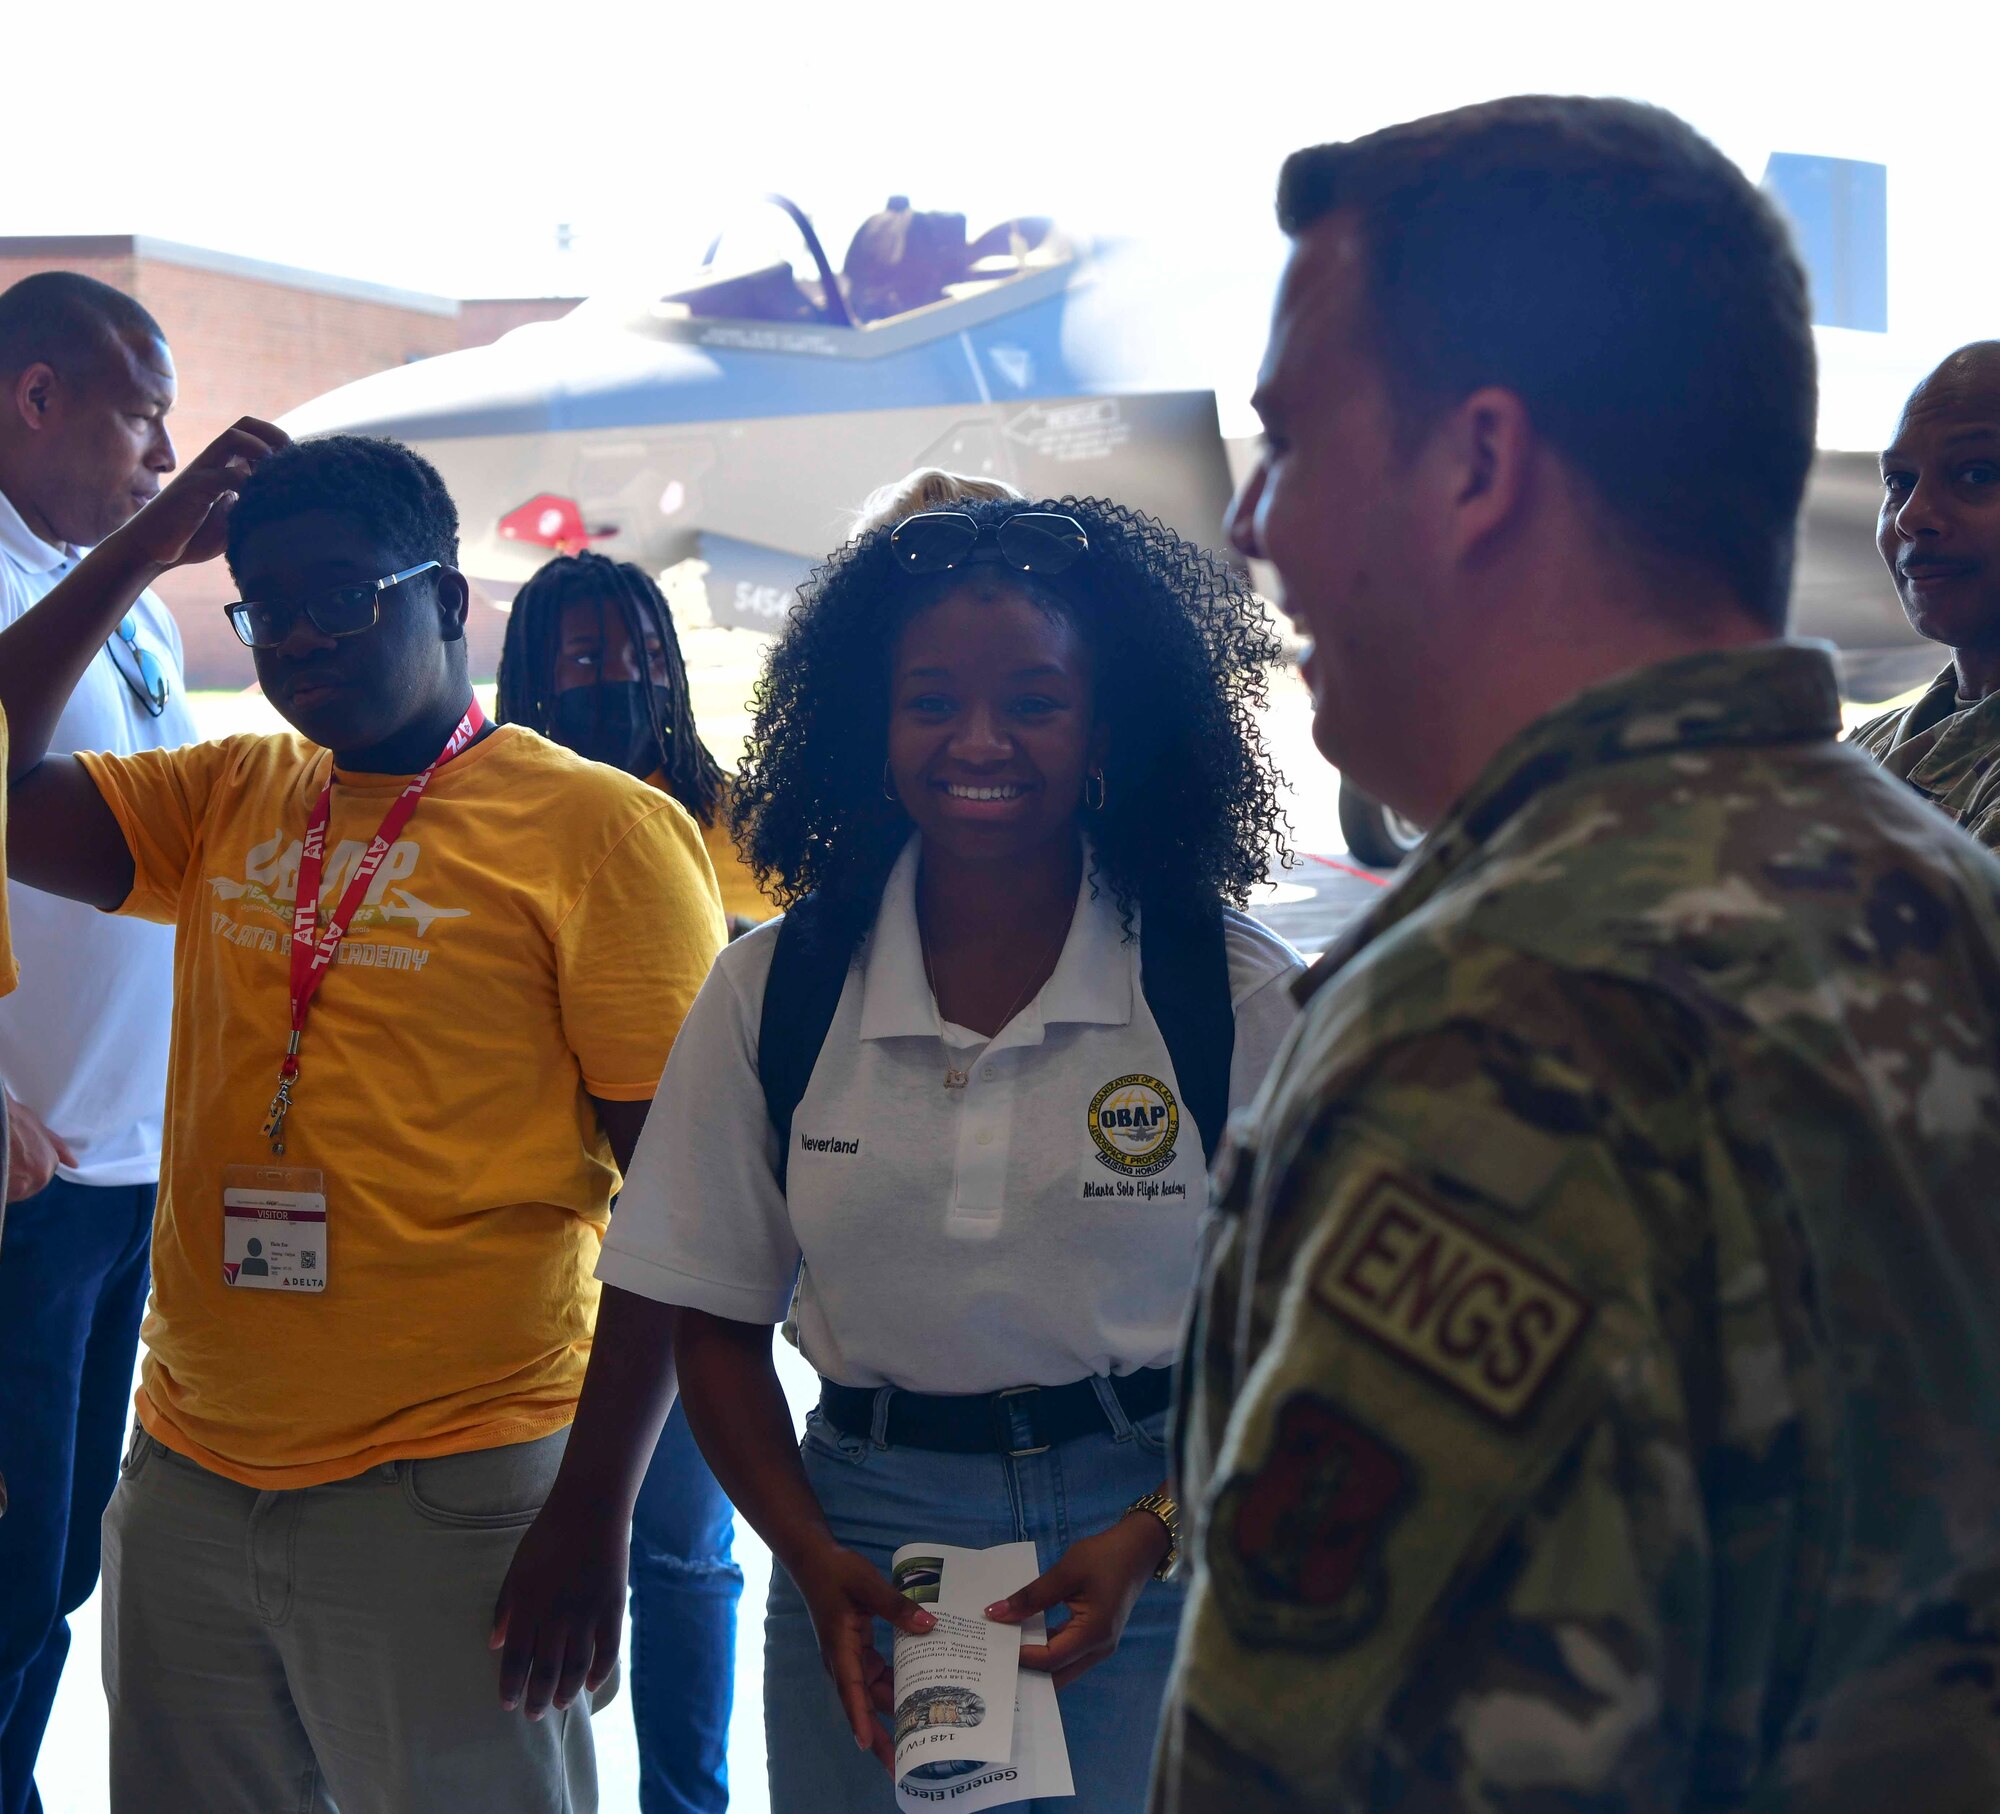 Delta Air Lines and the Organization of Black Aerospace Professionals hosted approximately 150 students, ages 13-18, on the airline's 21st annual Dream Flight from Atlanta to the 148th Fighter Wing, Minnesota Air National Guard, Duluth, Minnesota on July 15, 2022.